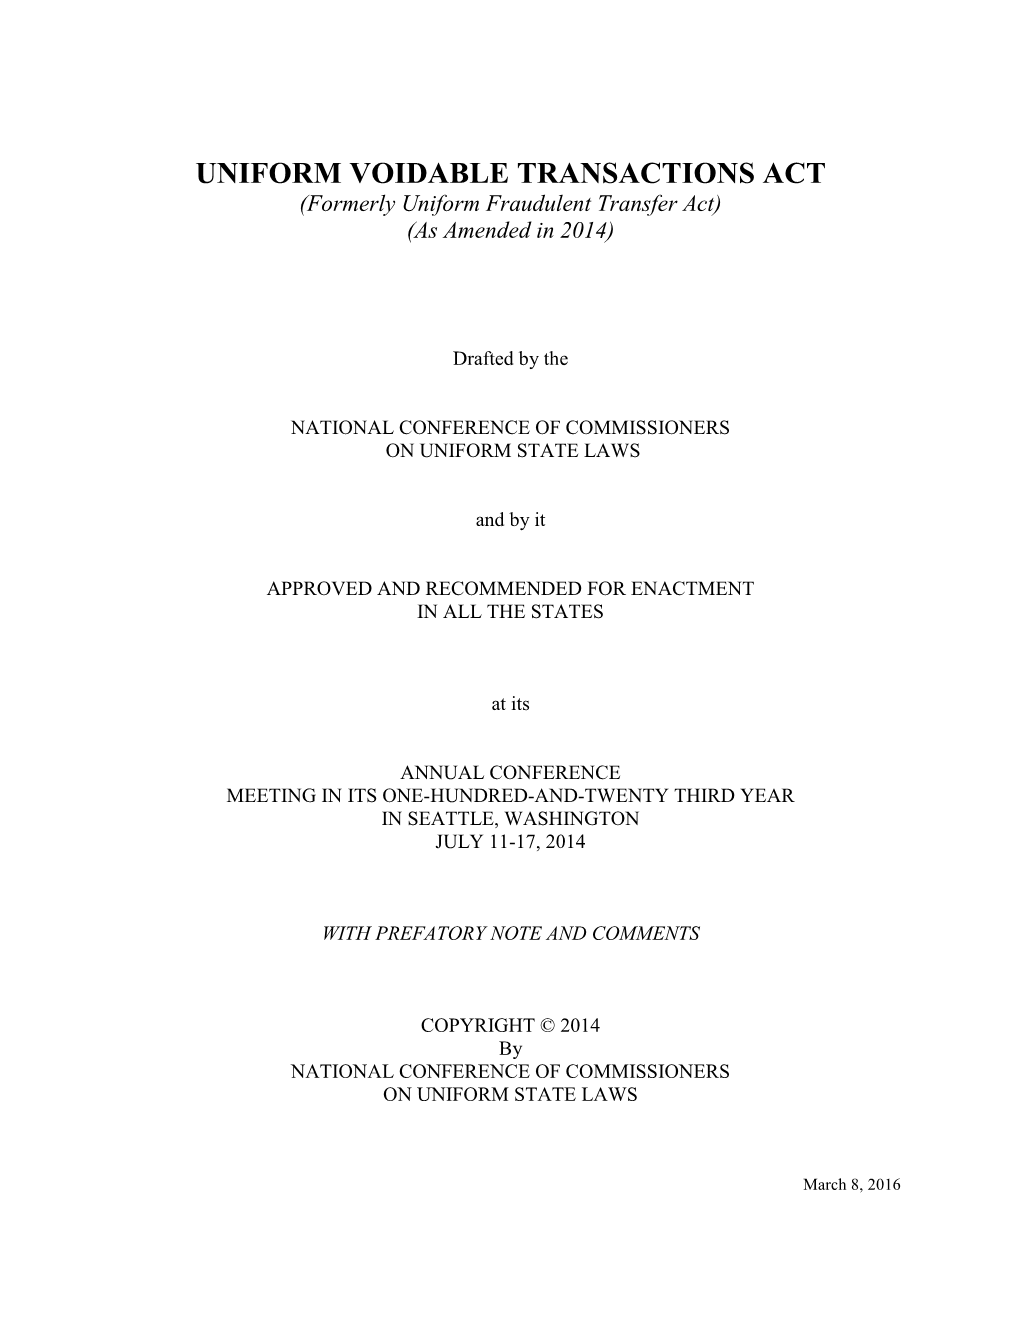 UNIFORM VOIDABLE TRANSACTIONS ACT (Formerly Uniform Fraudulent Transfer Act) (As Amended in 2014)